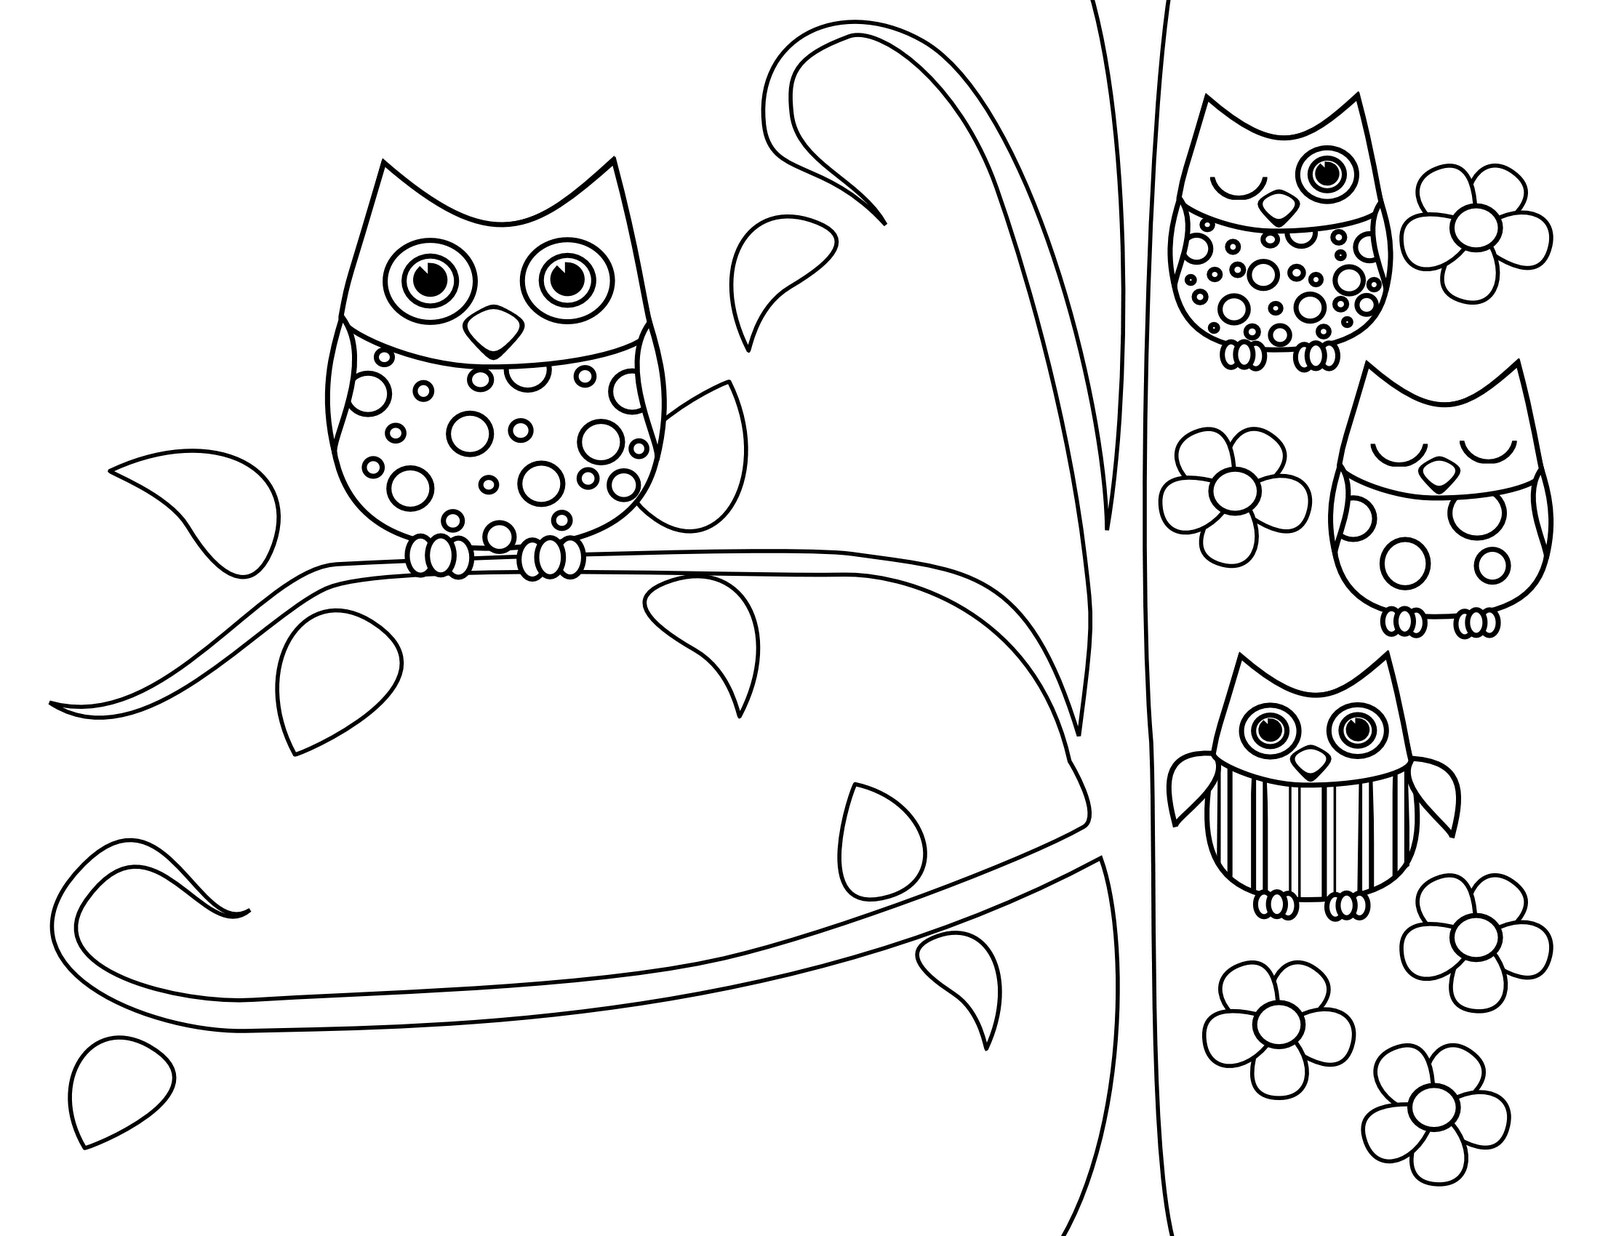 Owl Coloring Pages For Girls
 owl coloring pages free printables